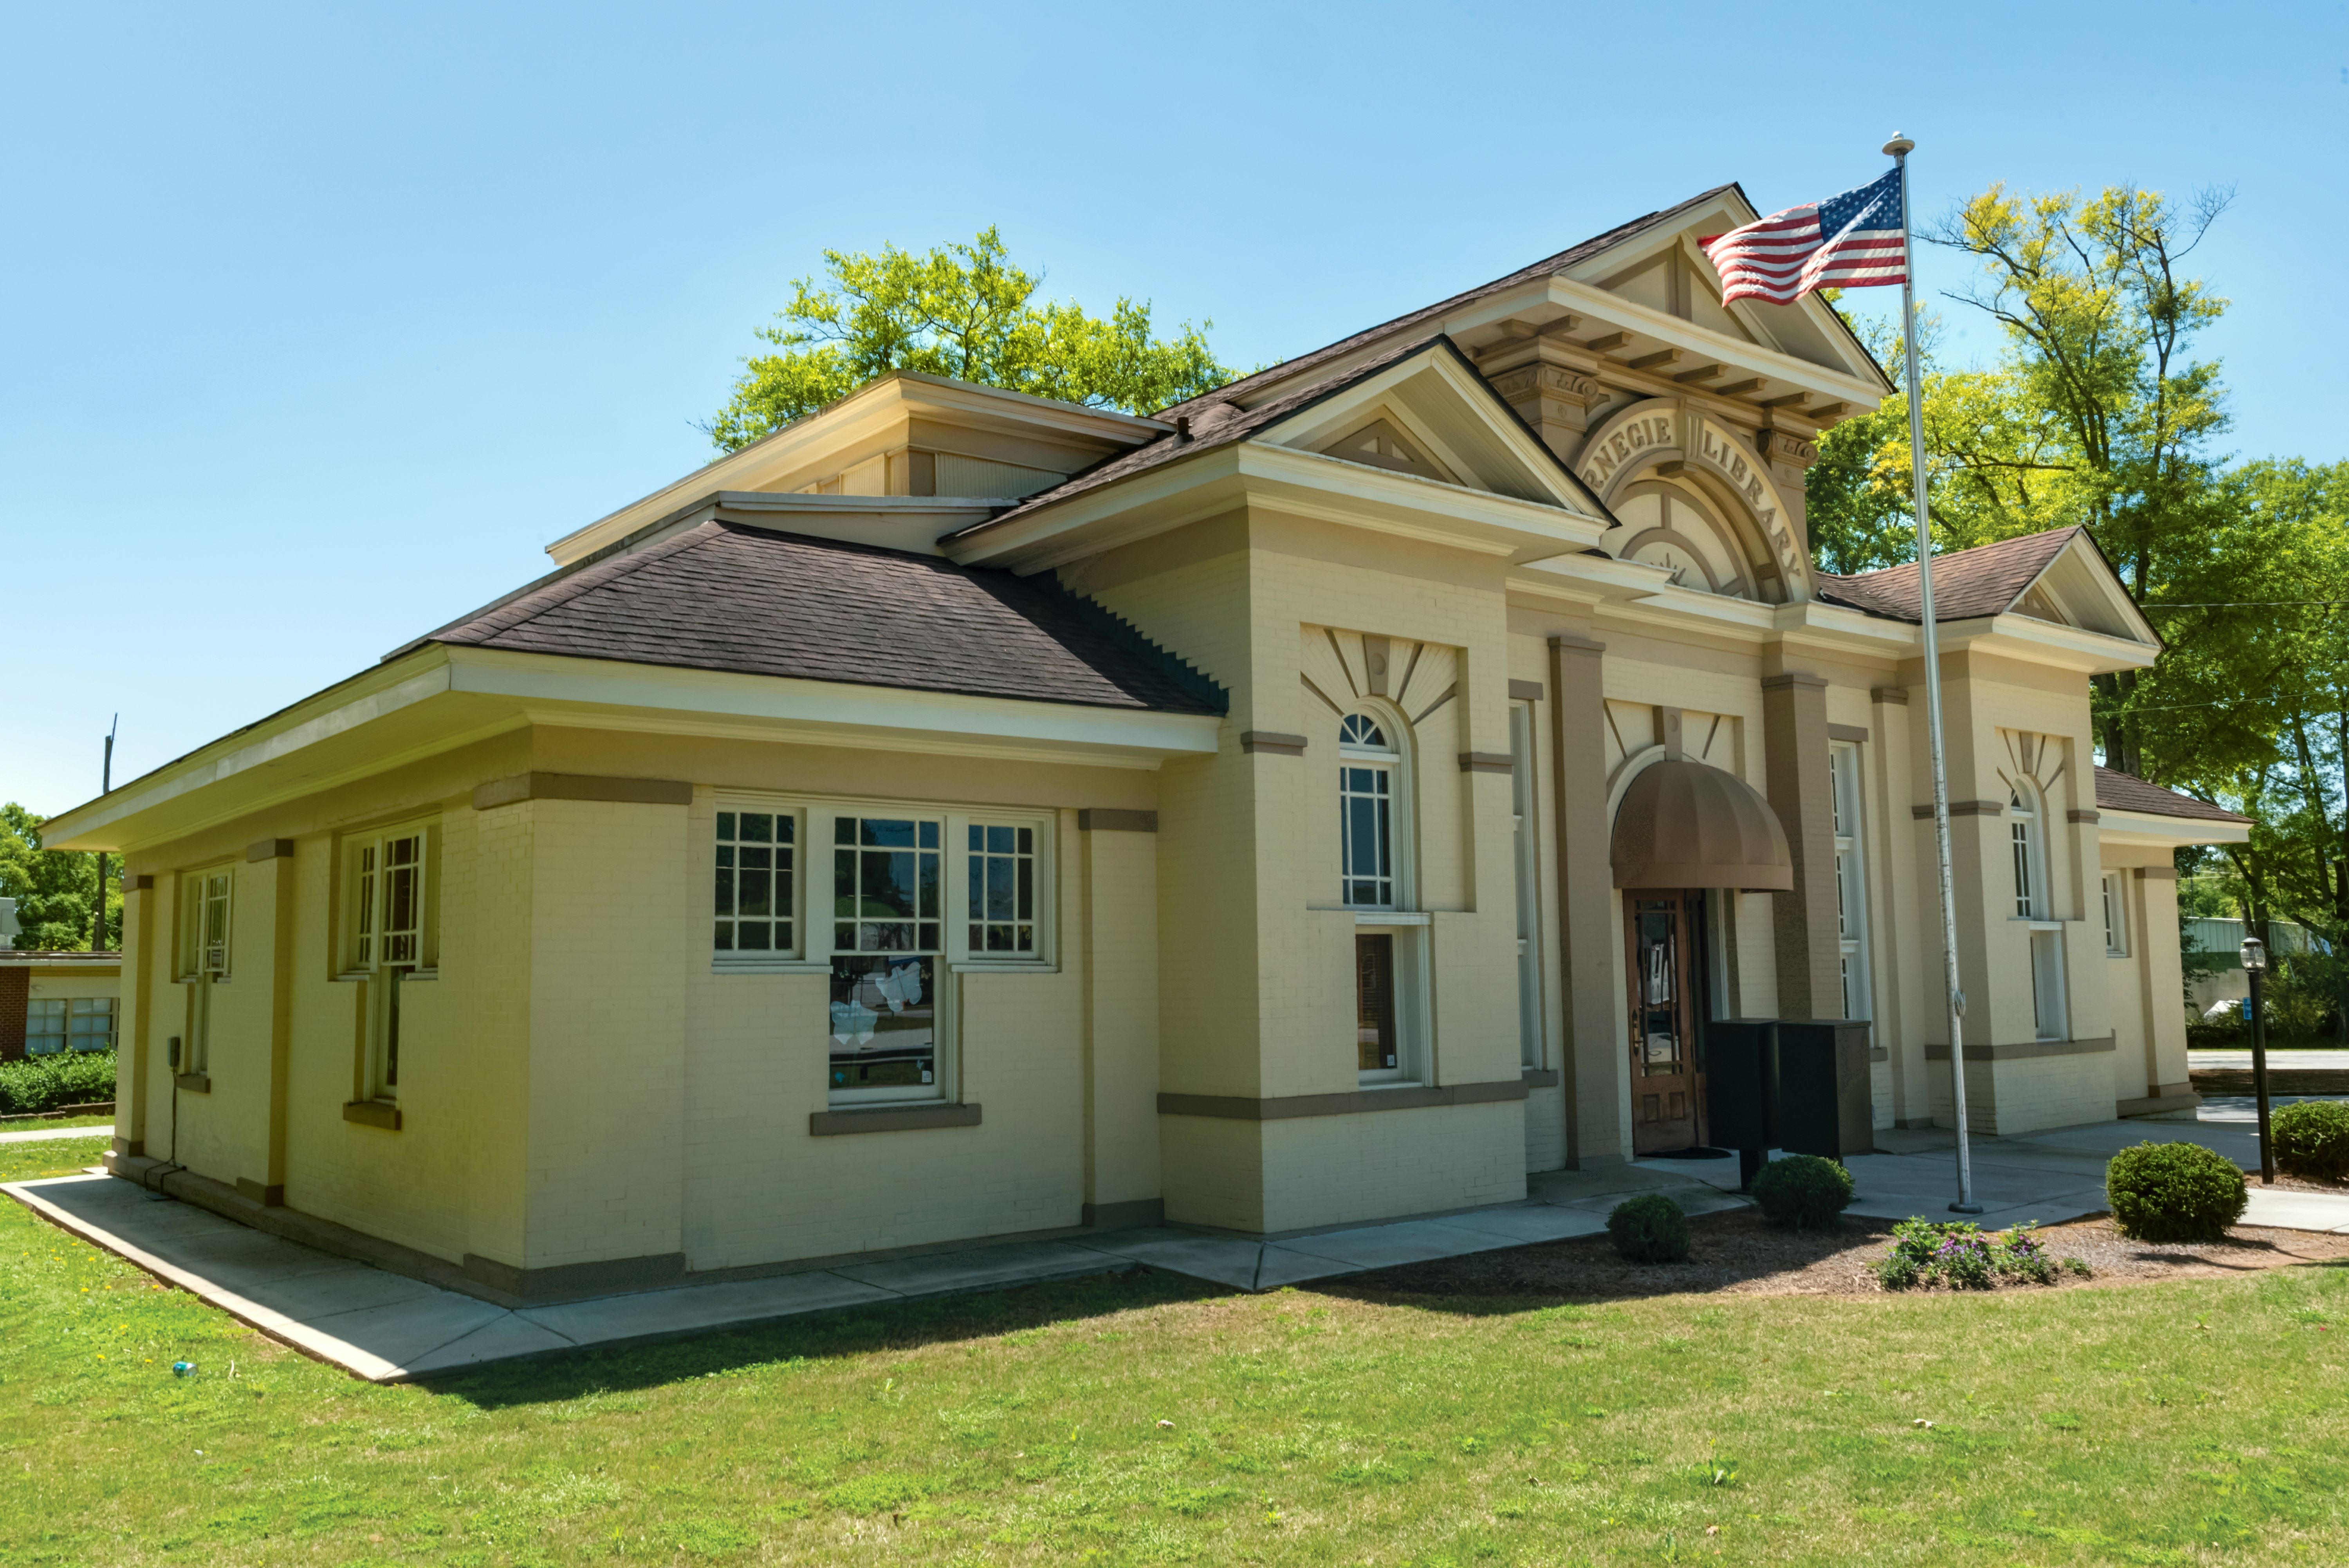 Lavonia Carnegie Library